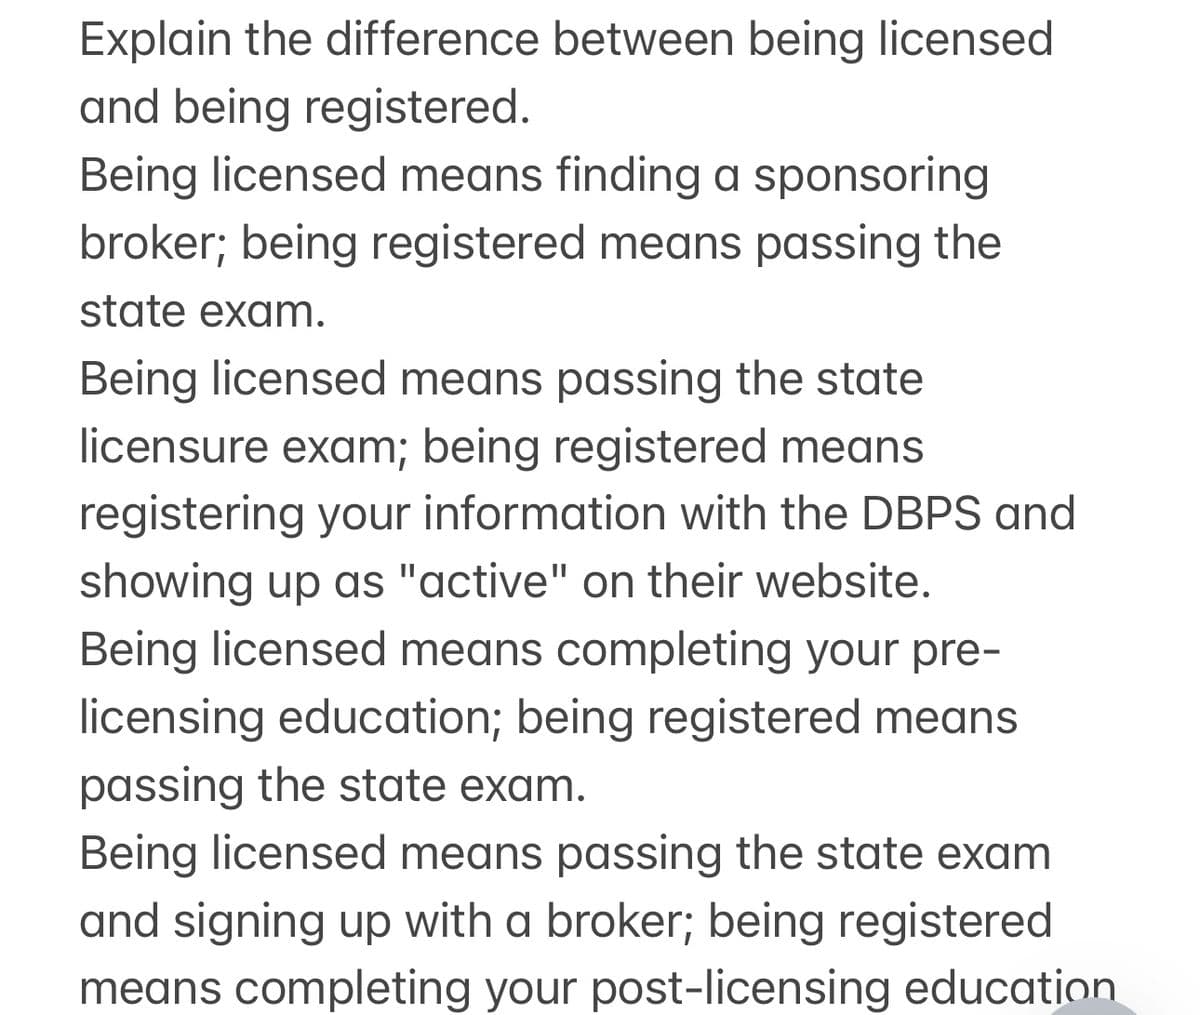 Explain the difference between being licensed
and being registered.
Being licensed means finding a sponsoring
broker; being registered means passing the
state exam.
Being licensed means passing the state
licensure exam; being registered means
registering your information with the DBPS and
showing up as "active" on their website.
Being licensed means completing your pre-
licensing education; being registered means
passing the state exam.
Being licensed means passing the state exam
and signing up with a broker; being registered
means completing your post-licensing education